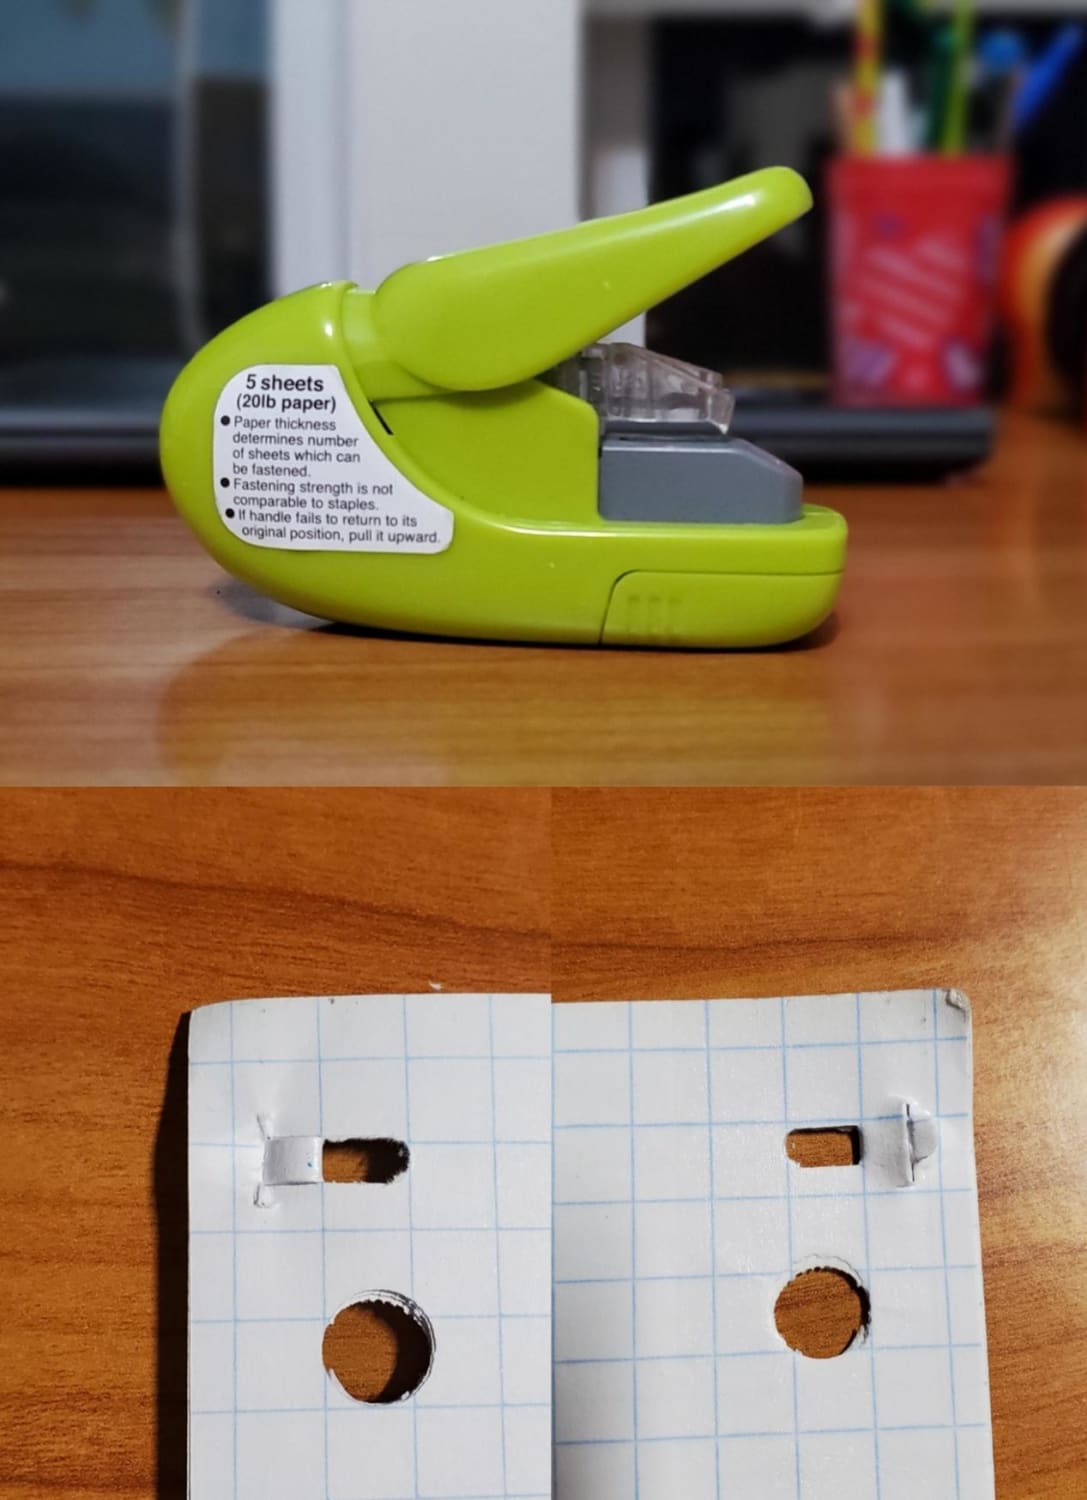 A stapler that doesn’t use staples, super environmentally friendly